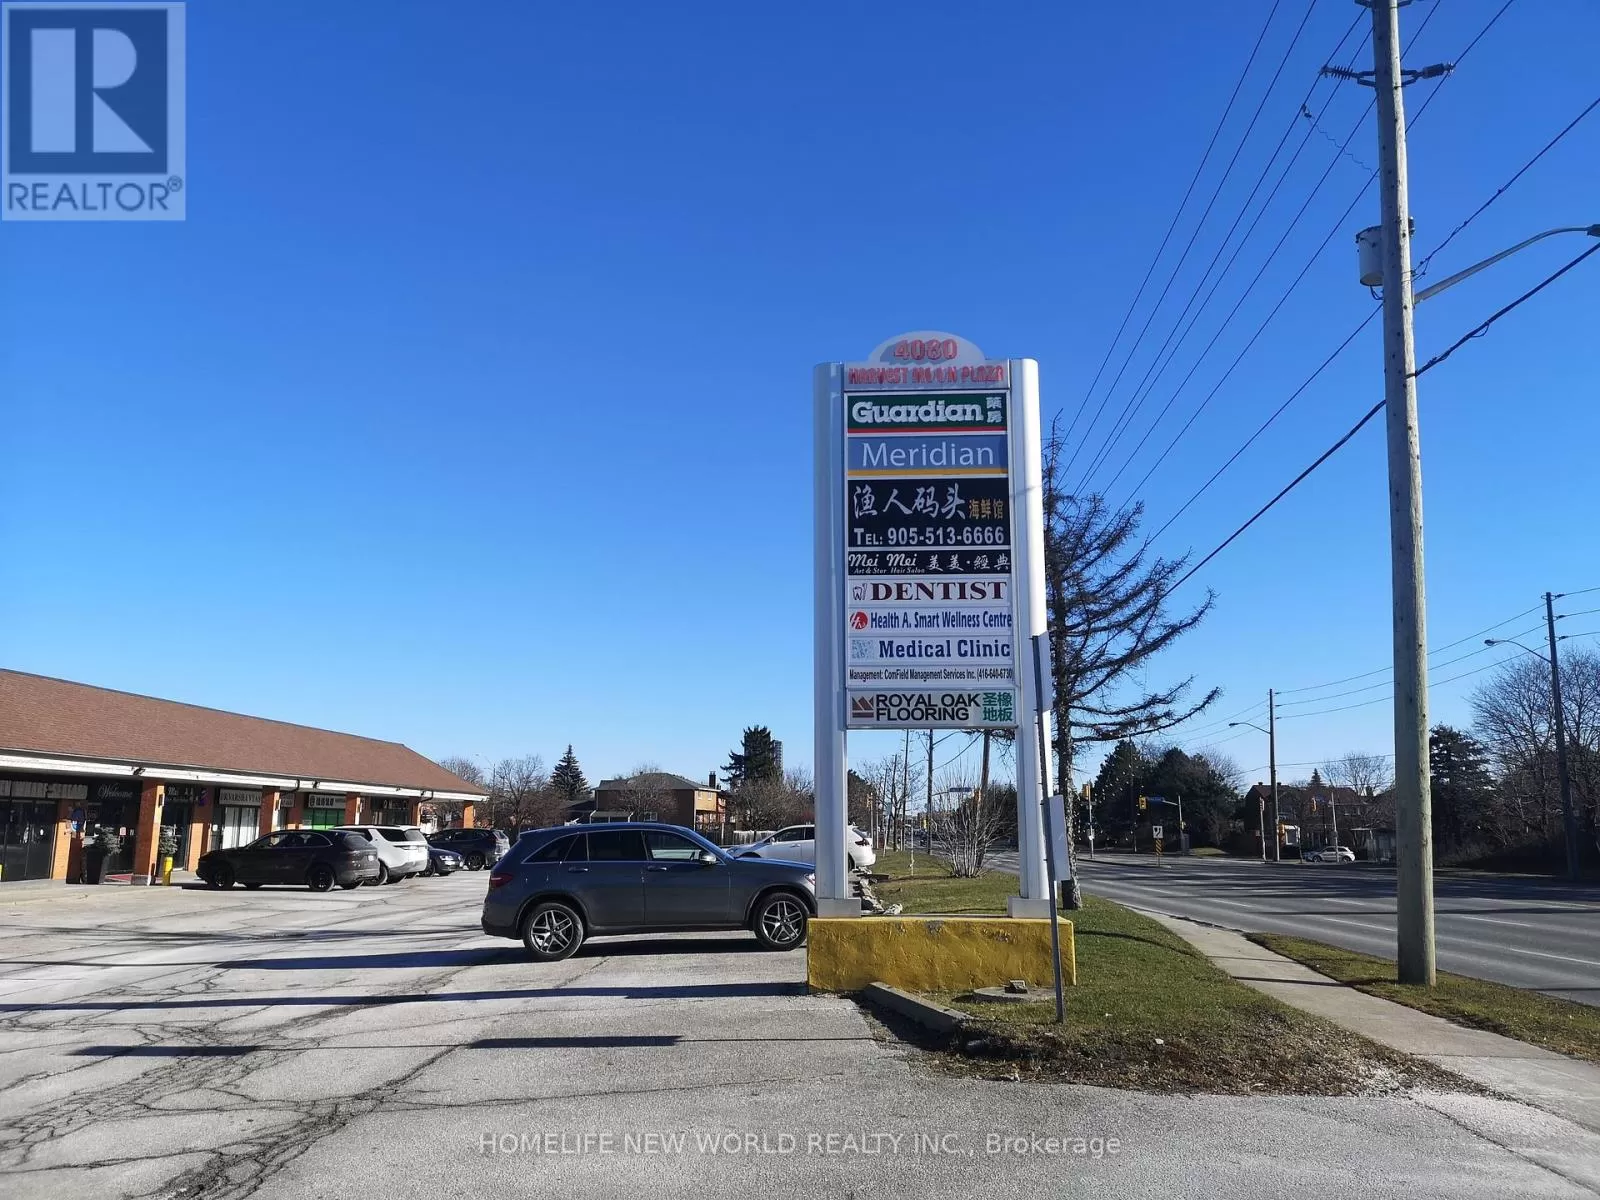 Offices for rent: #9 -4080 Steeles Ave E, Markham, Ontario L3R 4C3